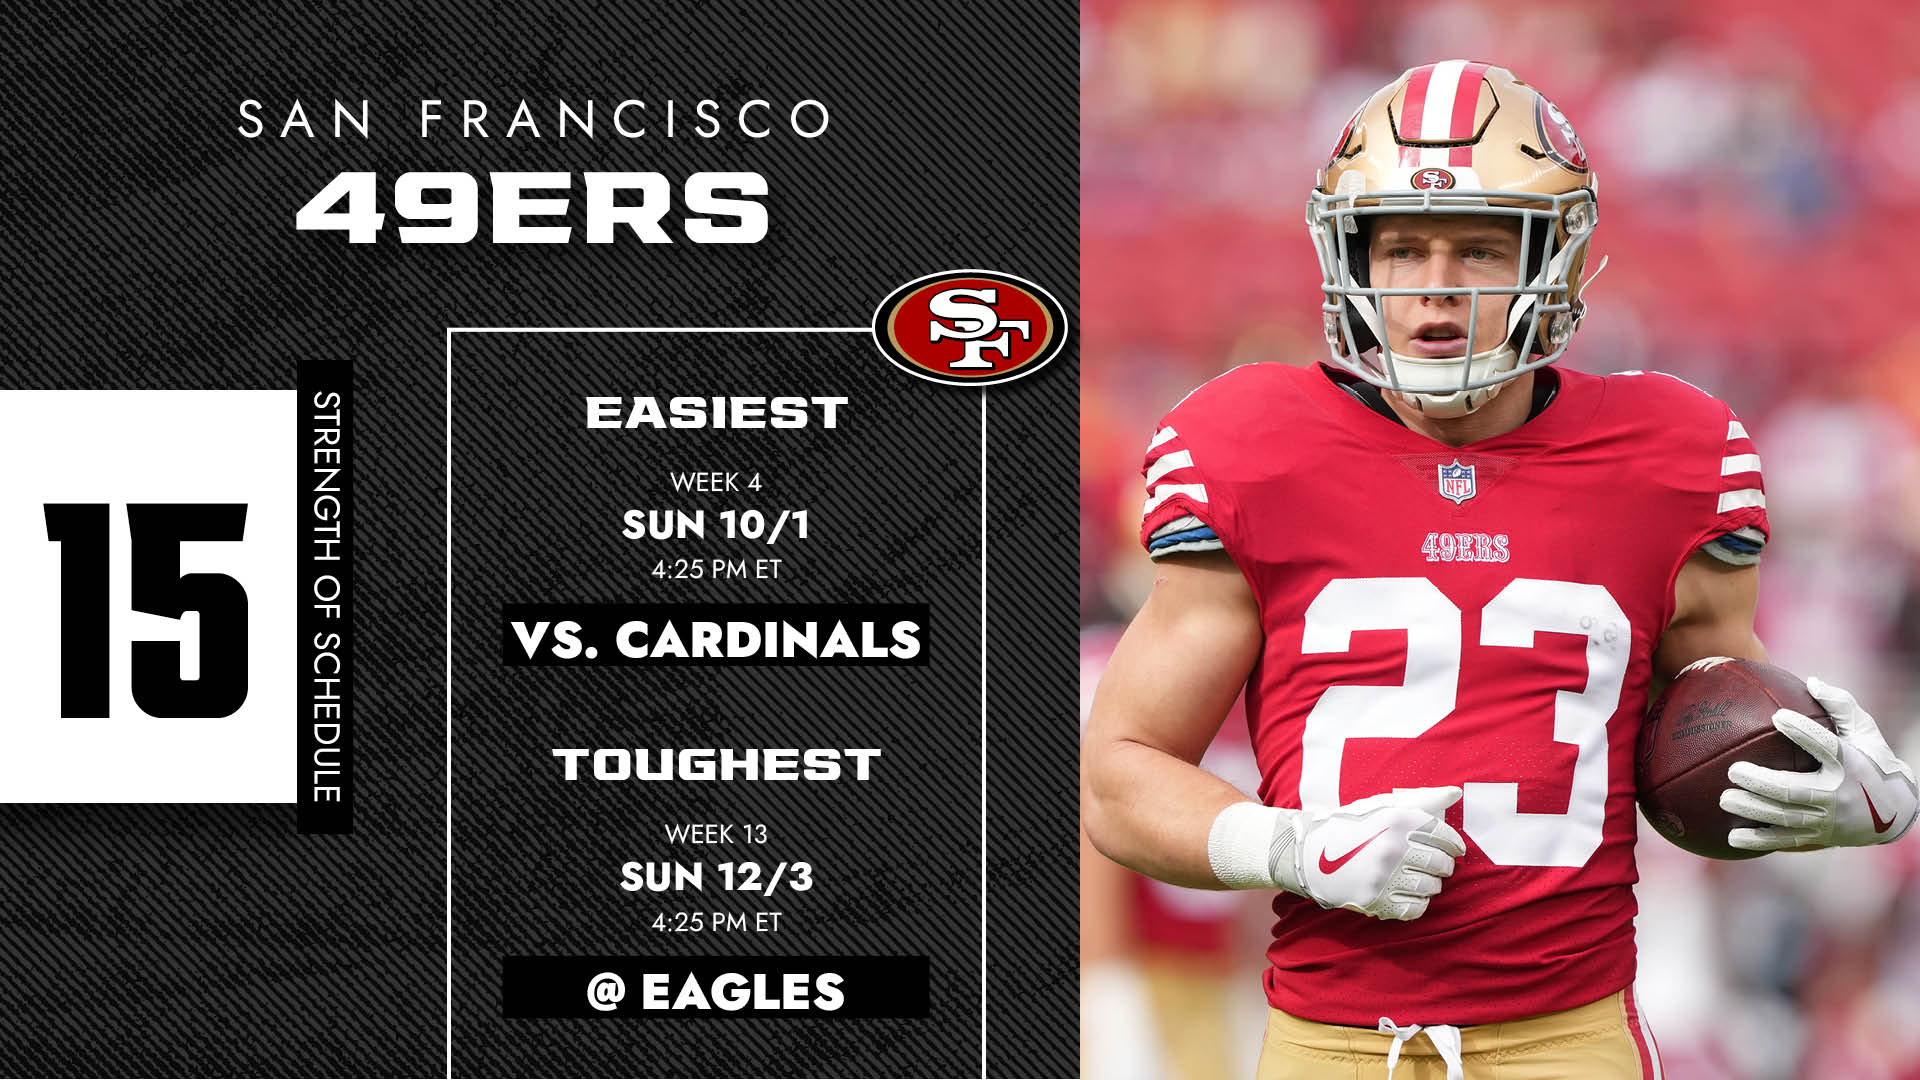 where are the 49ers playing this sunday